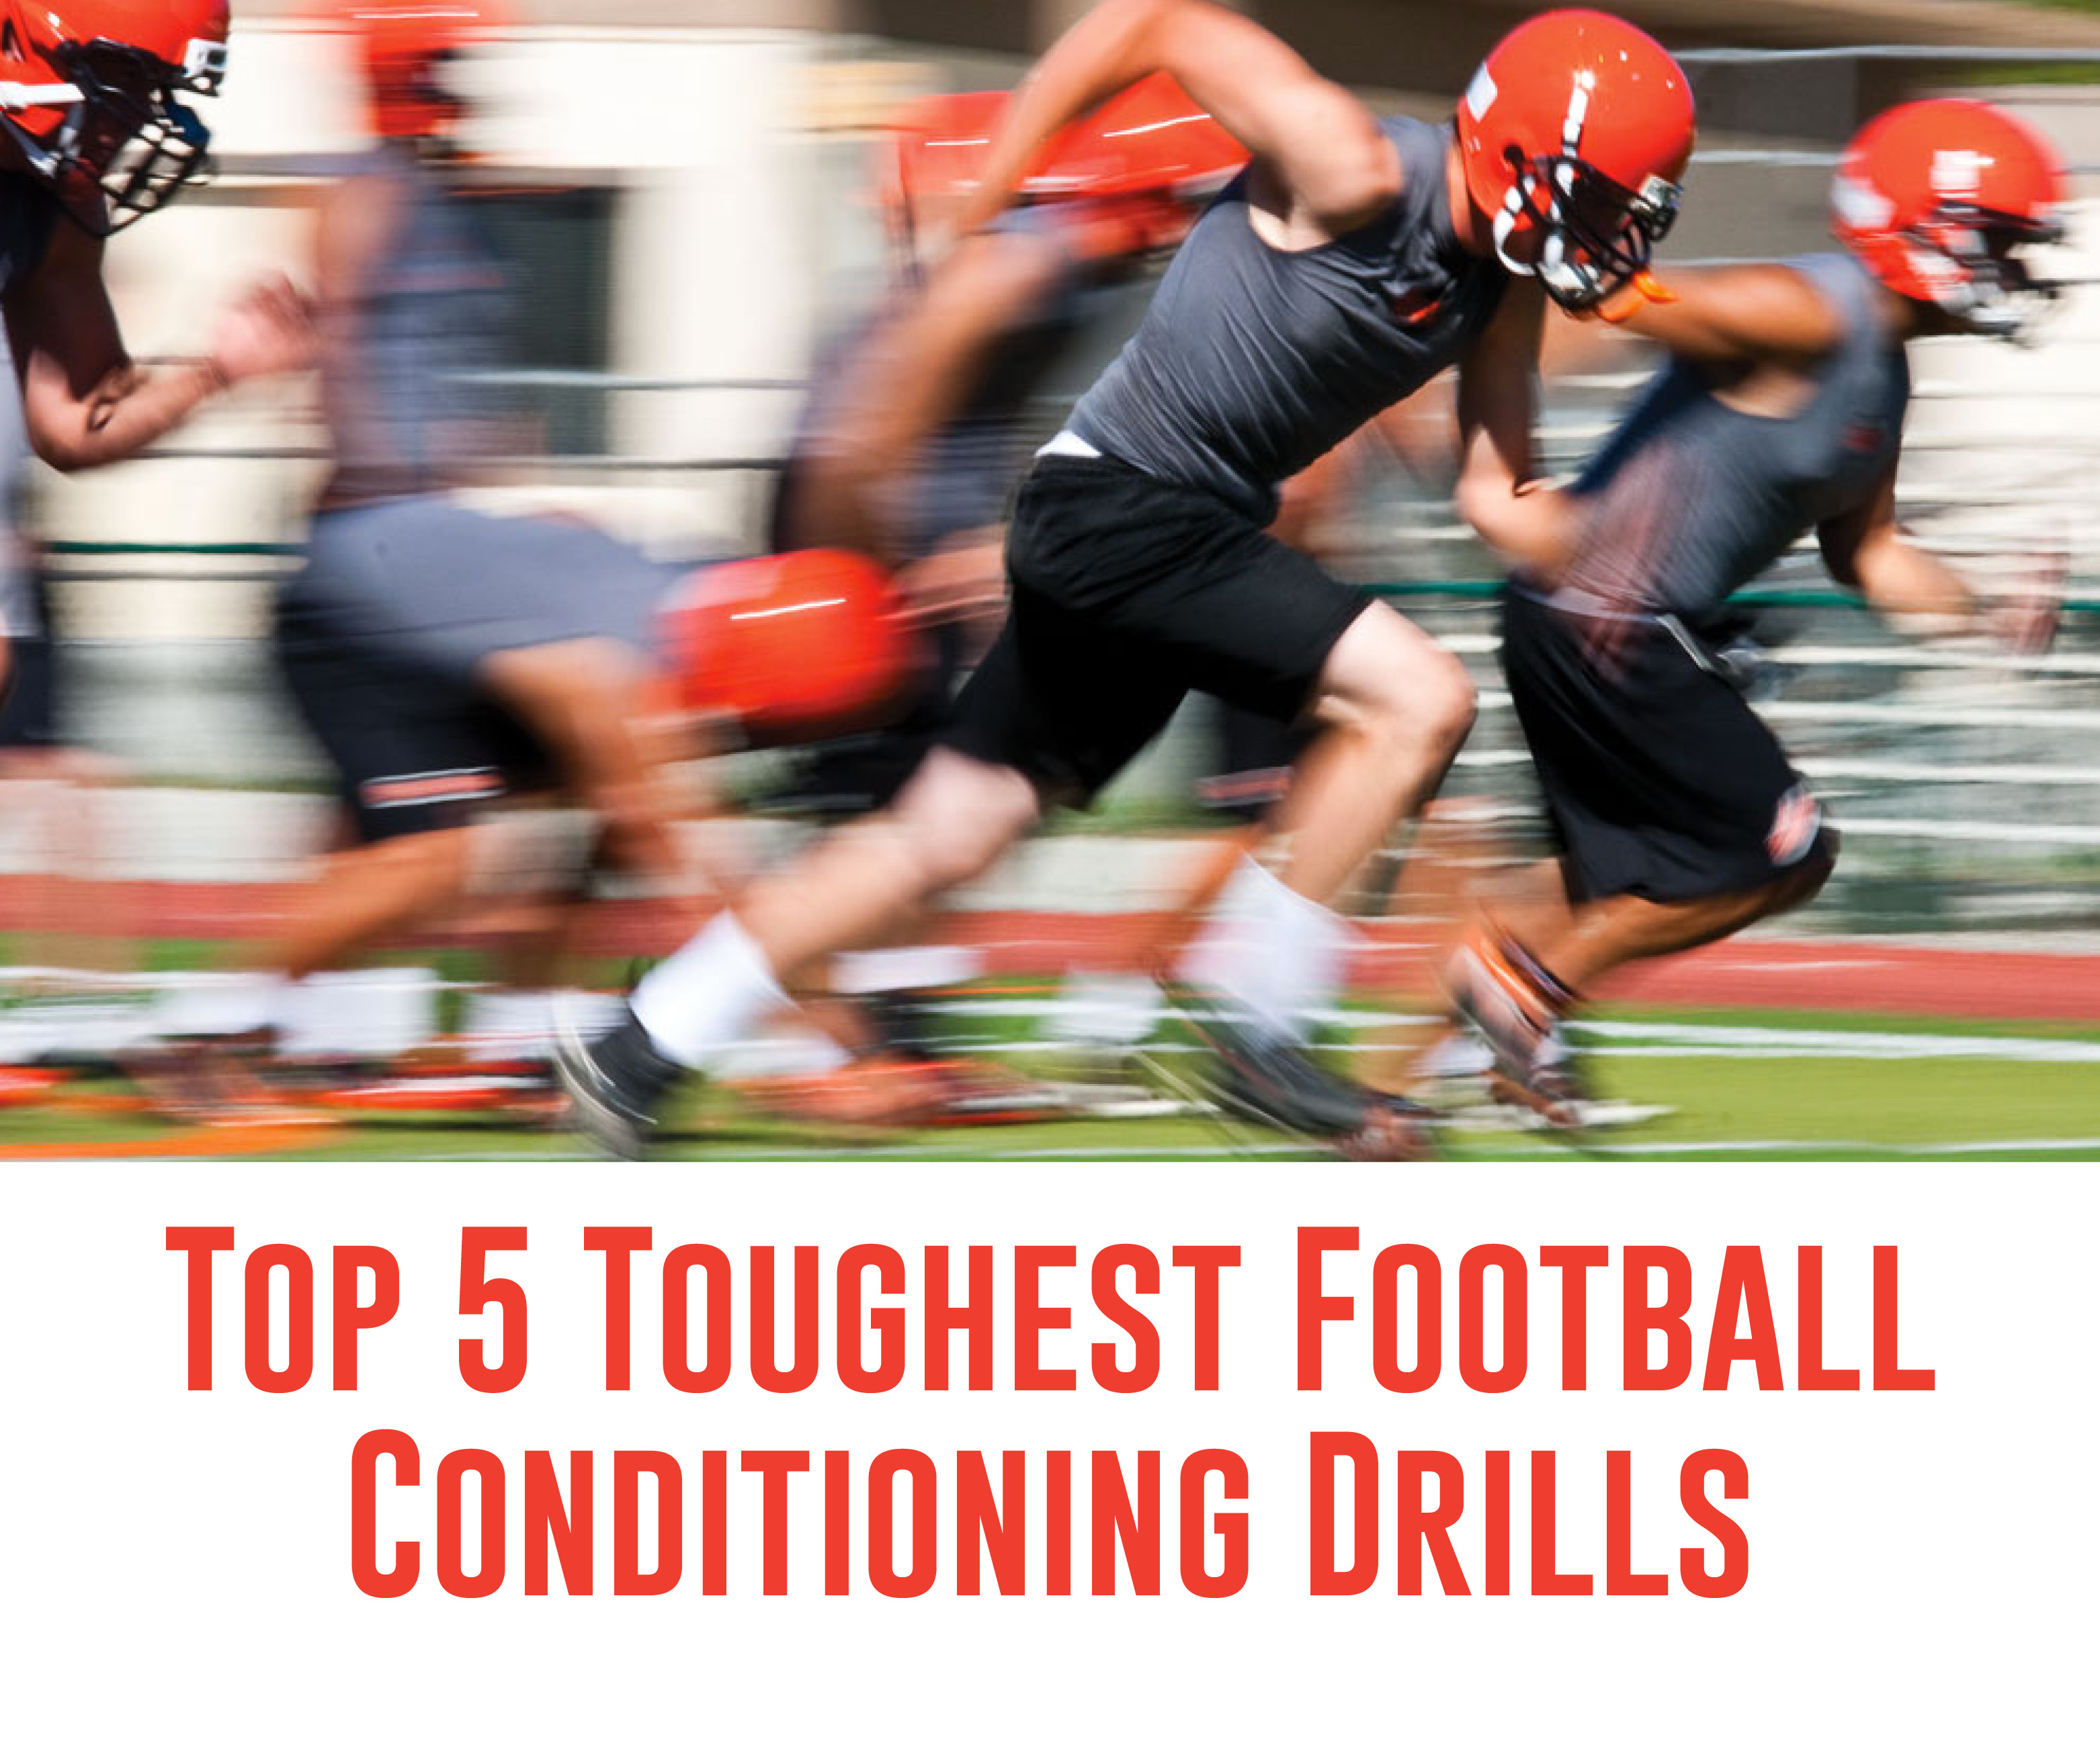 Top 5 Toughest Football Conditioning Drills - ITG Next